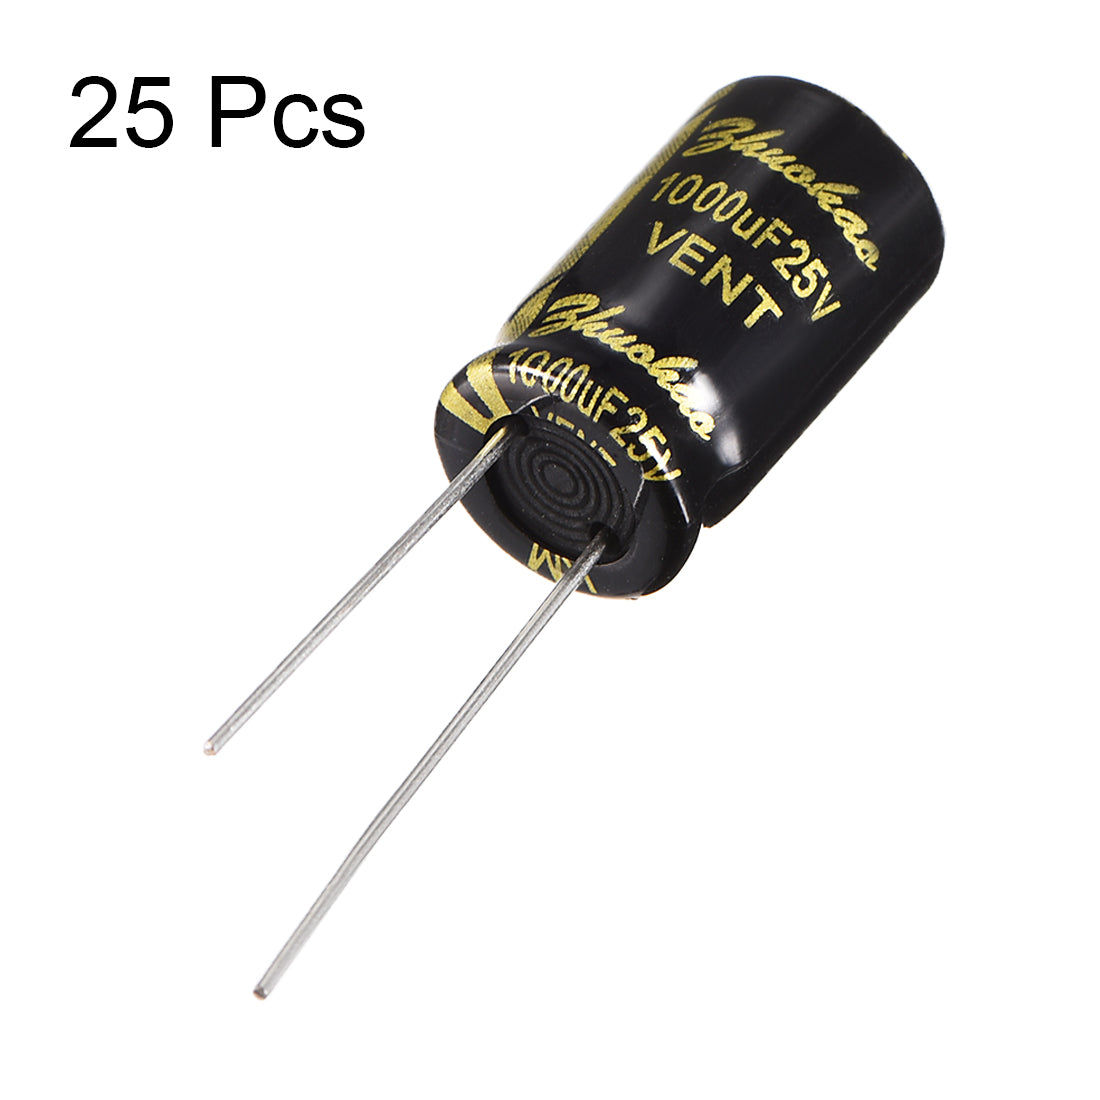 uxcell Uxcell Aluminum Radial Electrolytic Capacitor with 1000uF 25V 105 Celsius Life 2000H 10 x 17 mm Black 25pcs